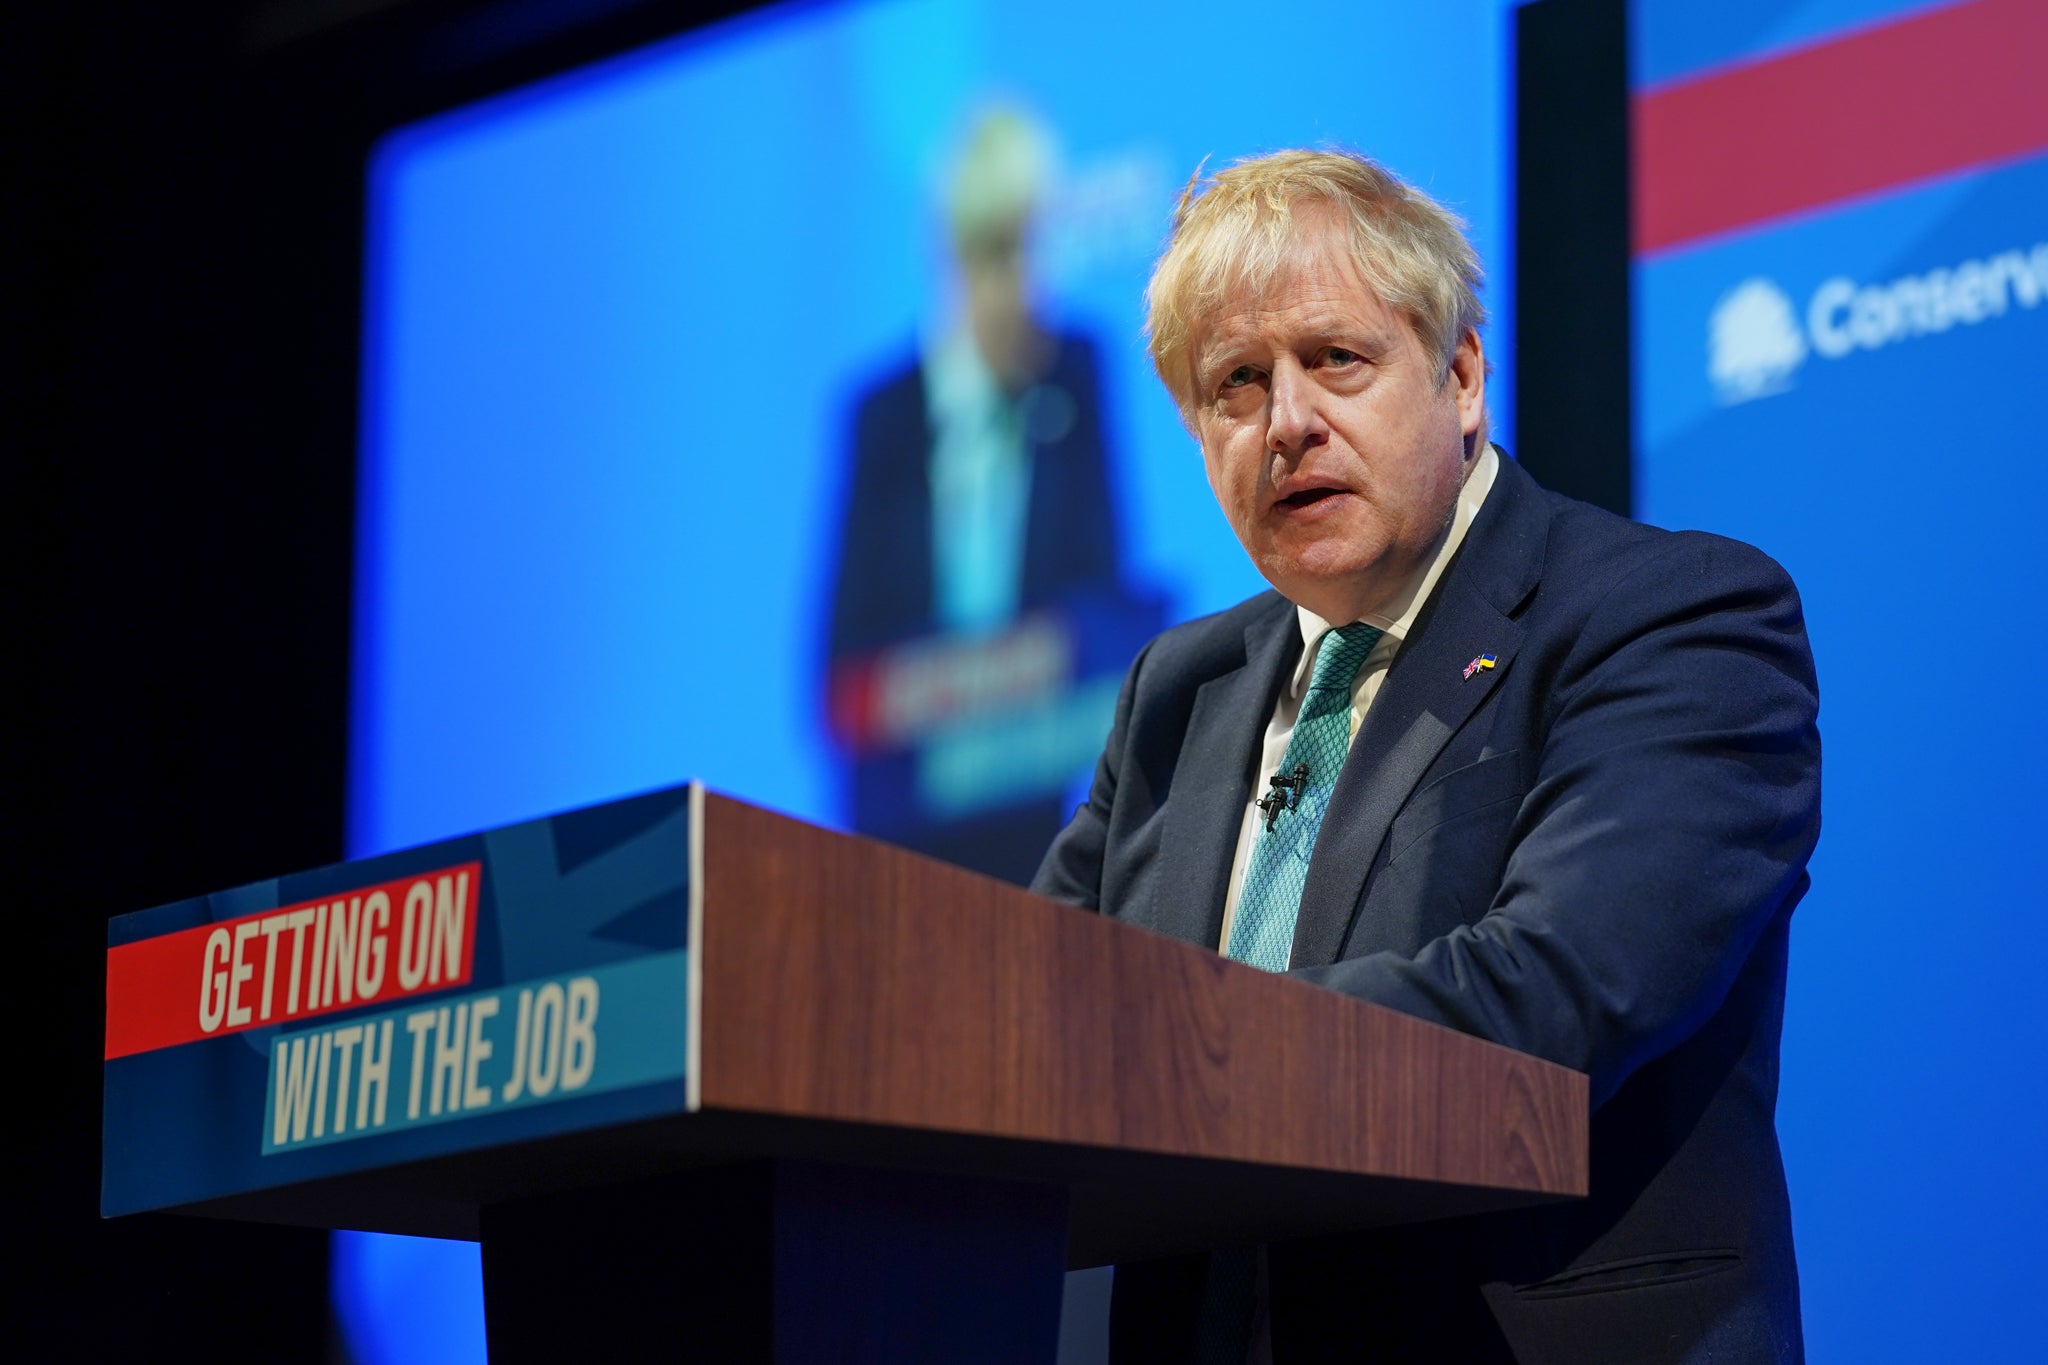 The prime minister delivers his keynote speech during the Conservative Party spring conference last week